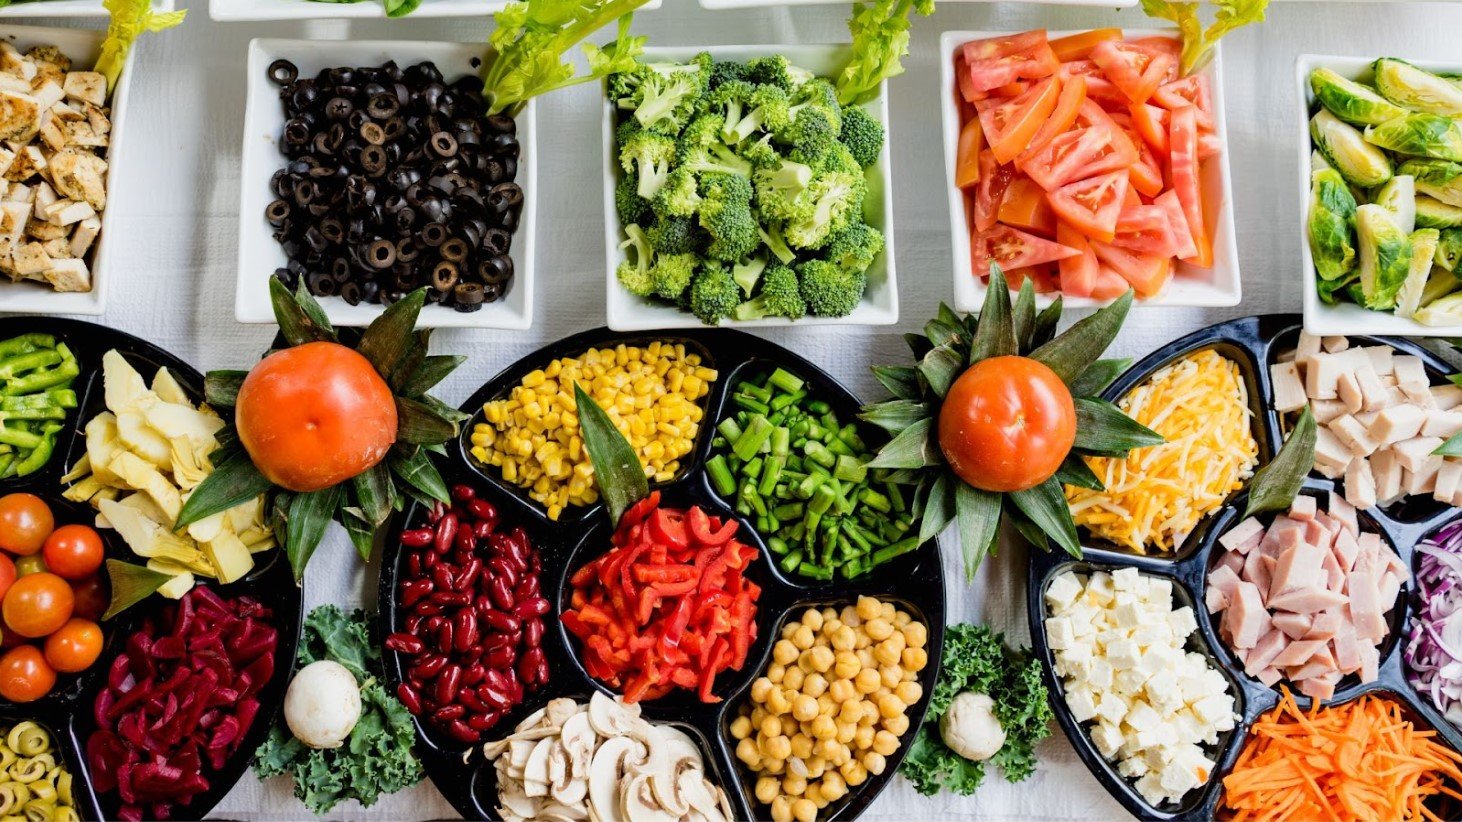 An array of Mediterranean diet ingredients spread out on a table. The center features a tomato with leaves arranged to look like a flower. Surrounding it are separate containers filled with various colorful foods including black olives, diced tomatoes, broccoli florets, green beans, corn kernels, sliced red peppers, kidney beans, chickpeas, shredded cheese, tofu cubes, chopped ham, and sliced mushrooms